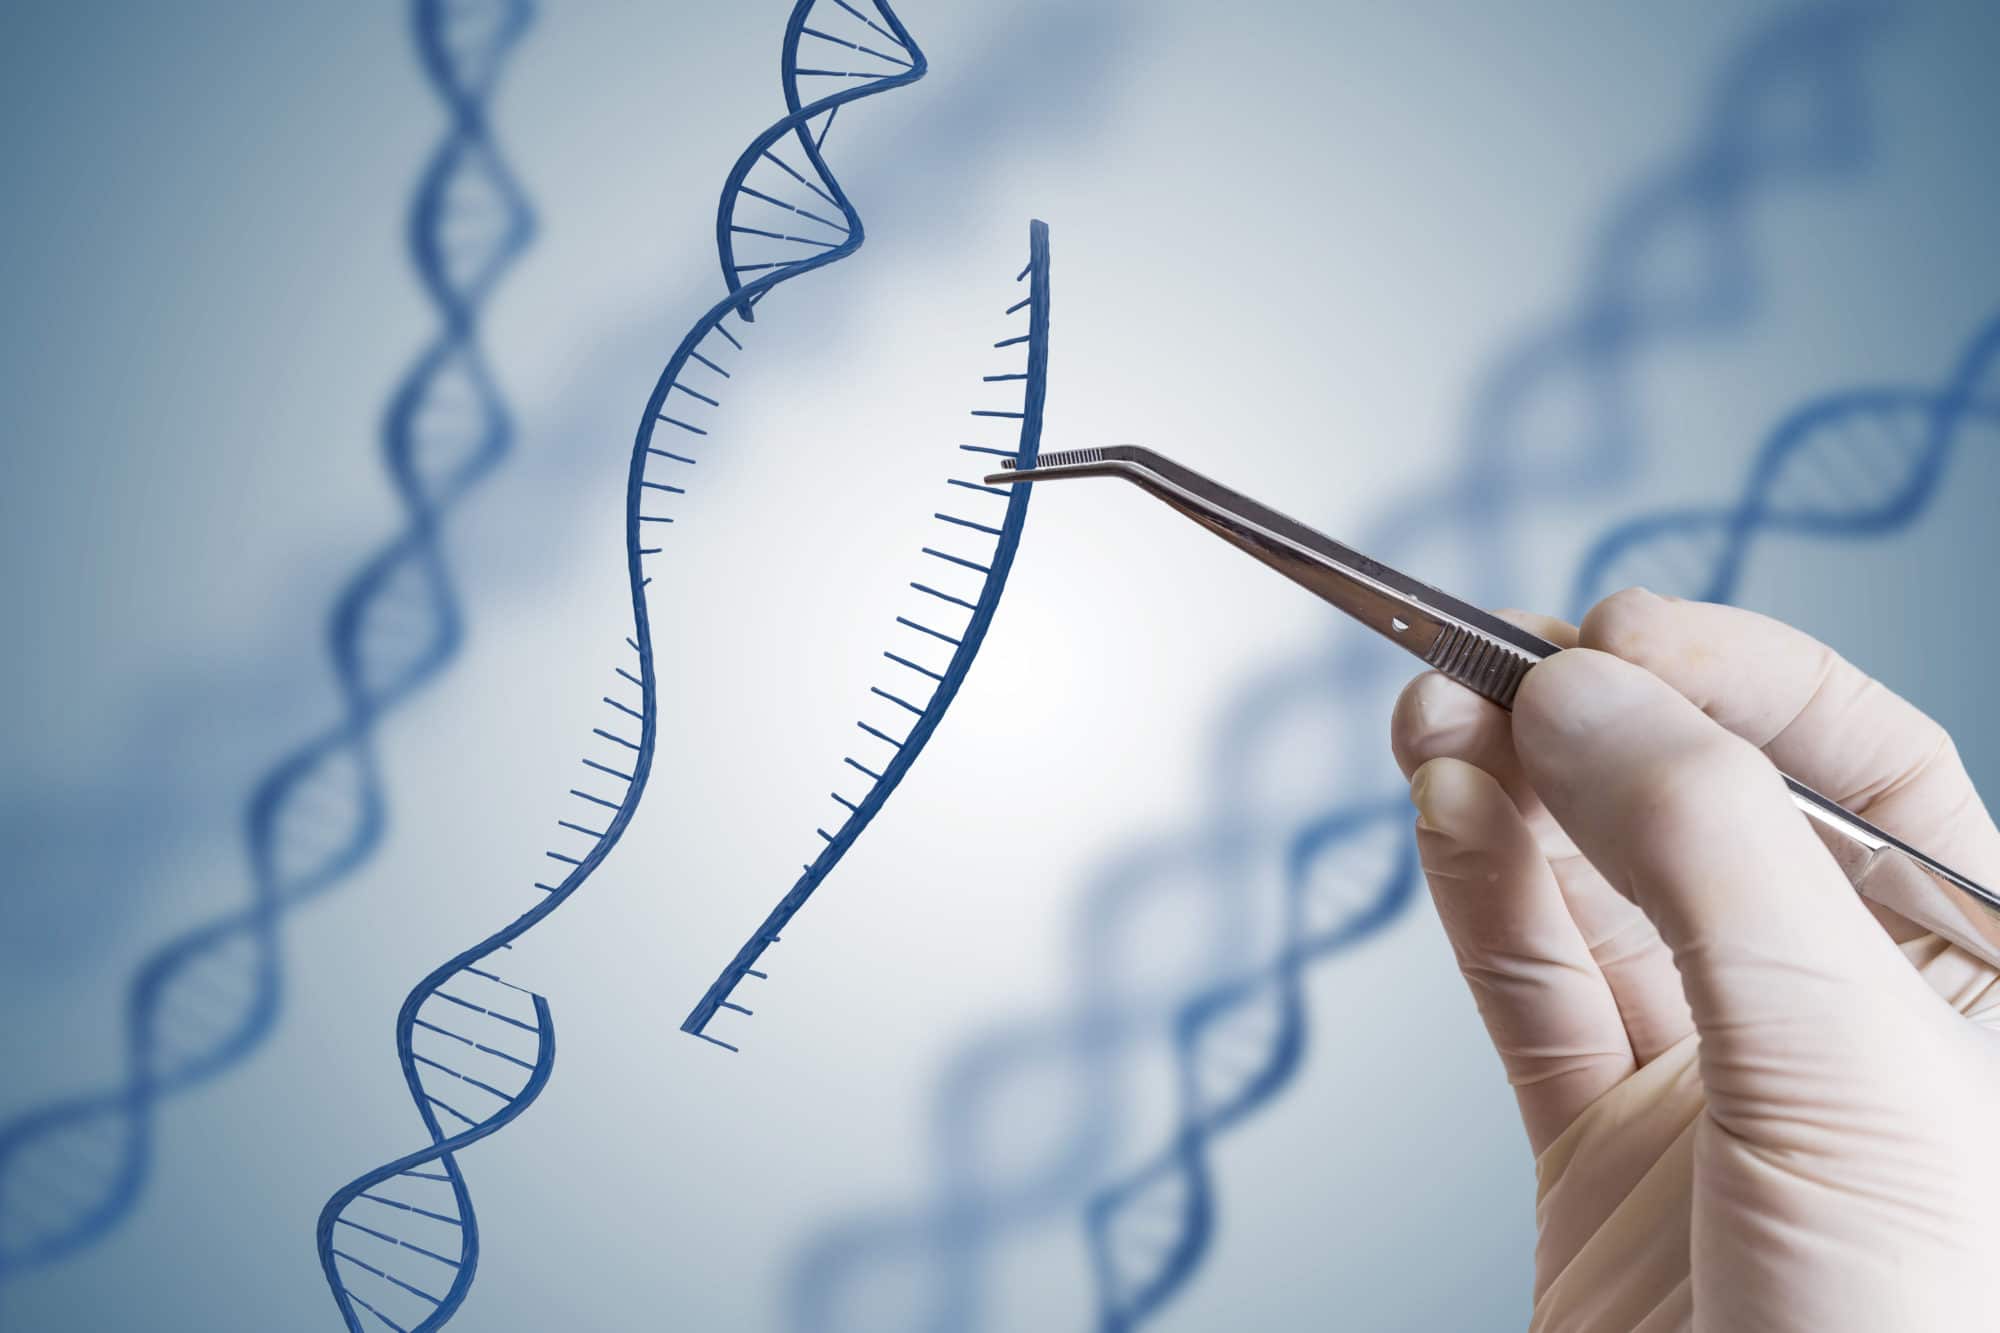 First clinical trial participant receives CRISPR-based therapy